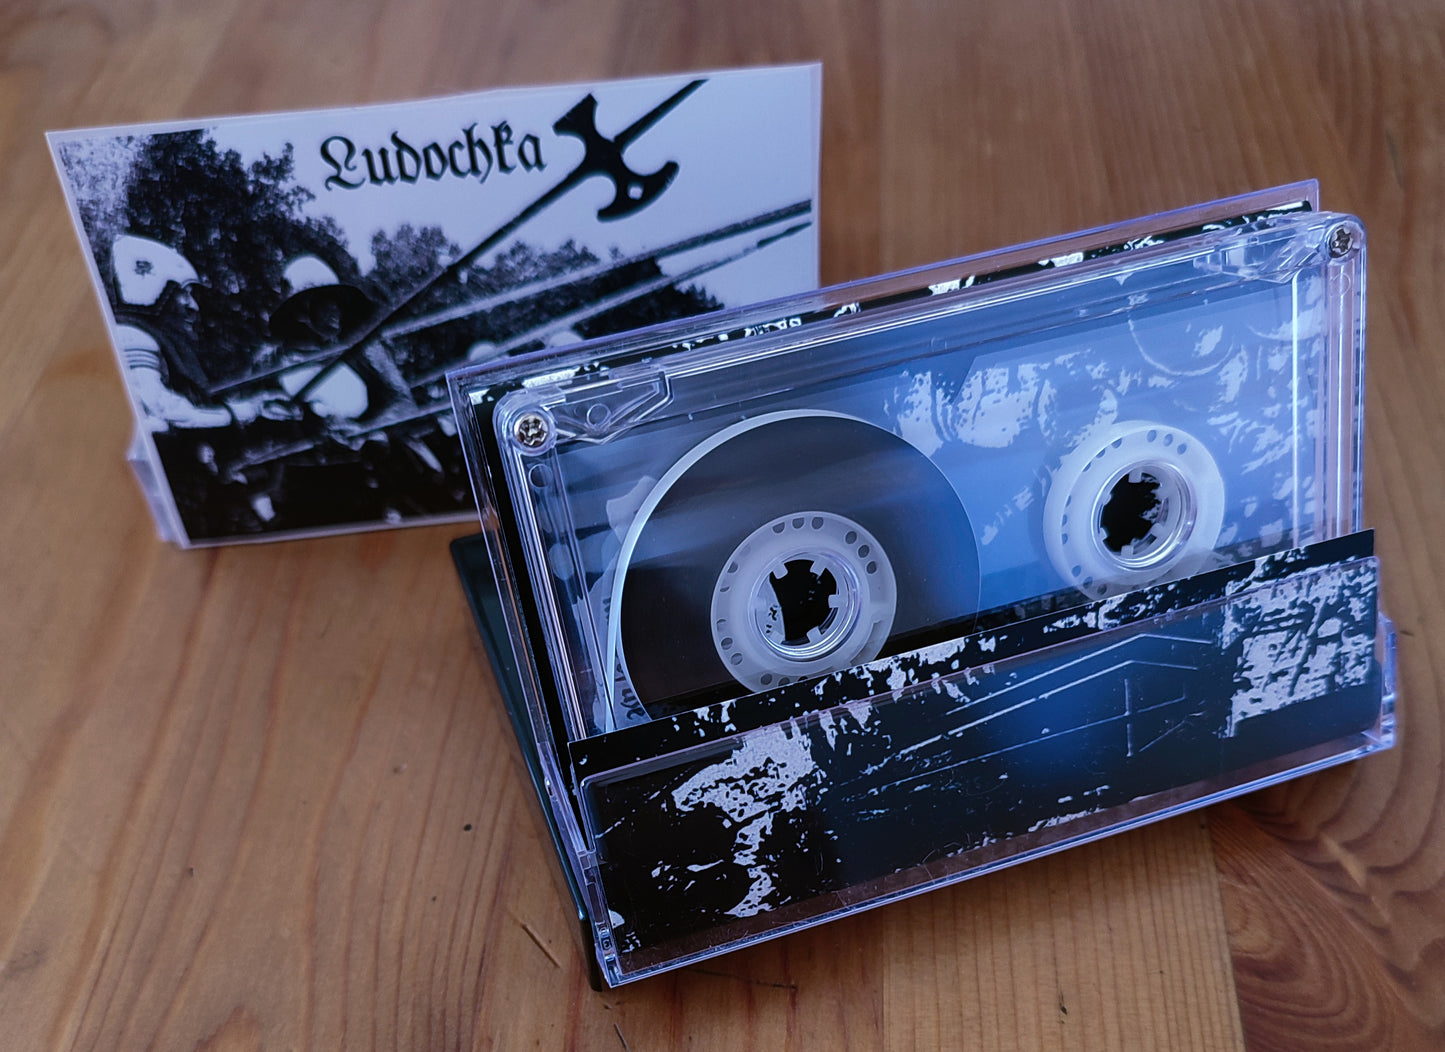 Ludochka (Ru) "In the name of the flesh...In the name of the blood" - Pro tape *New in Stock*